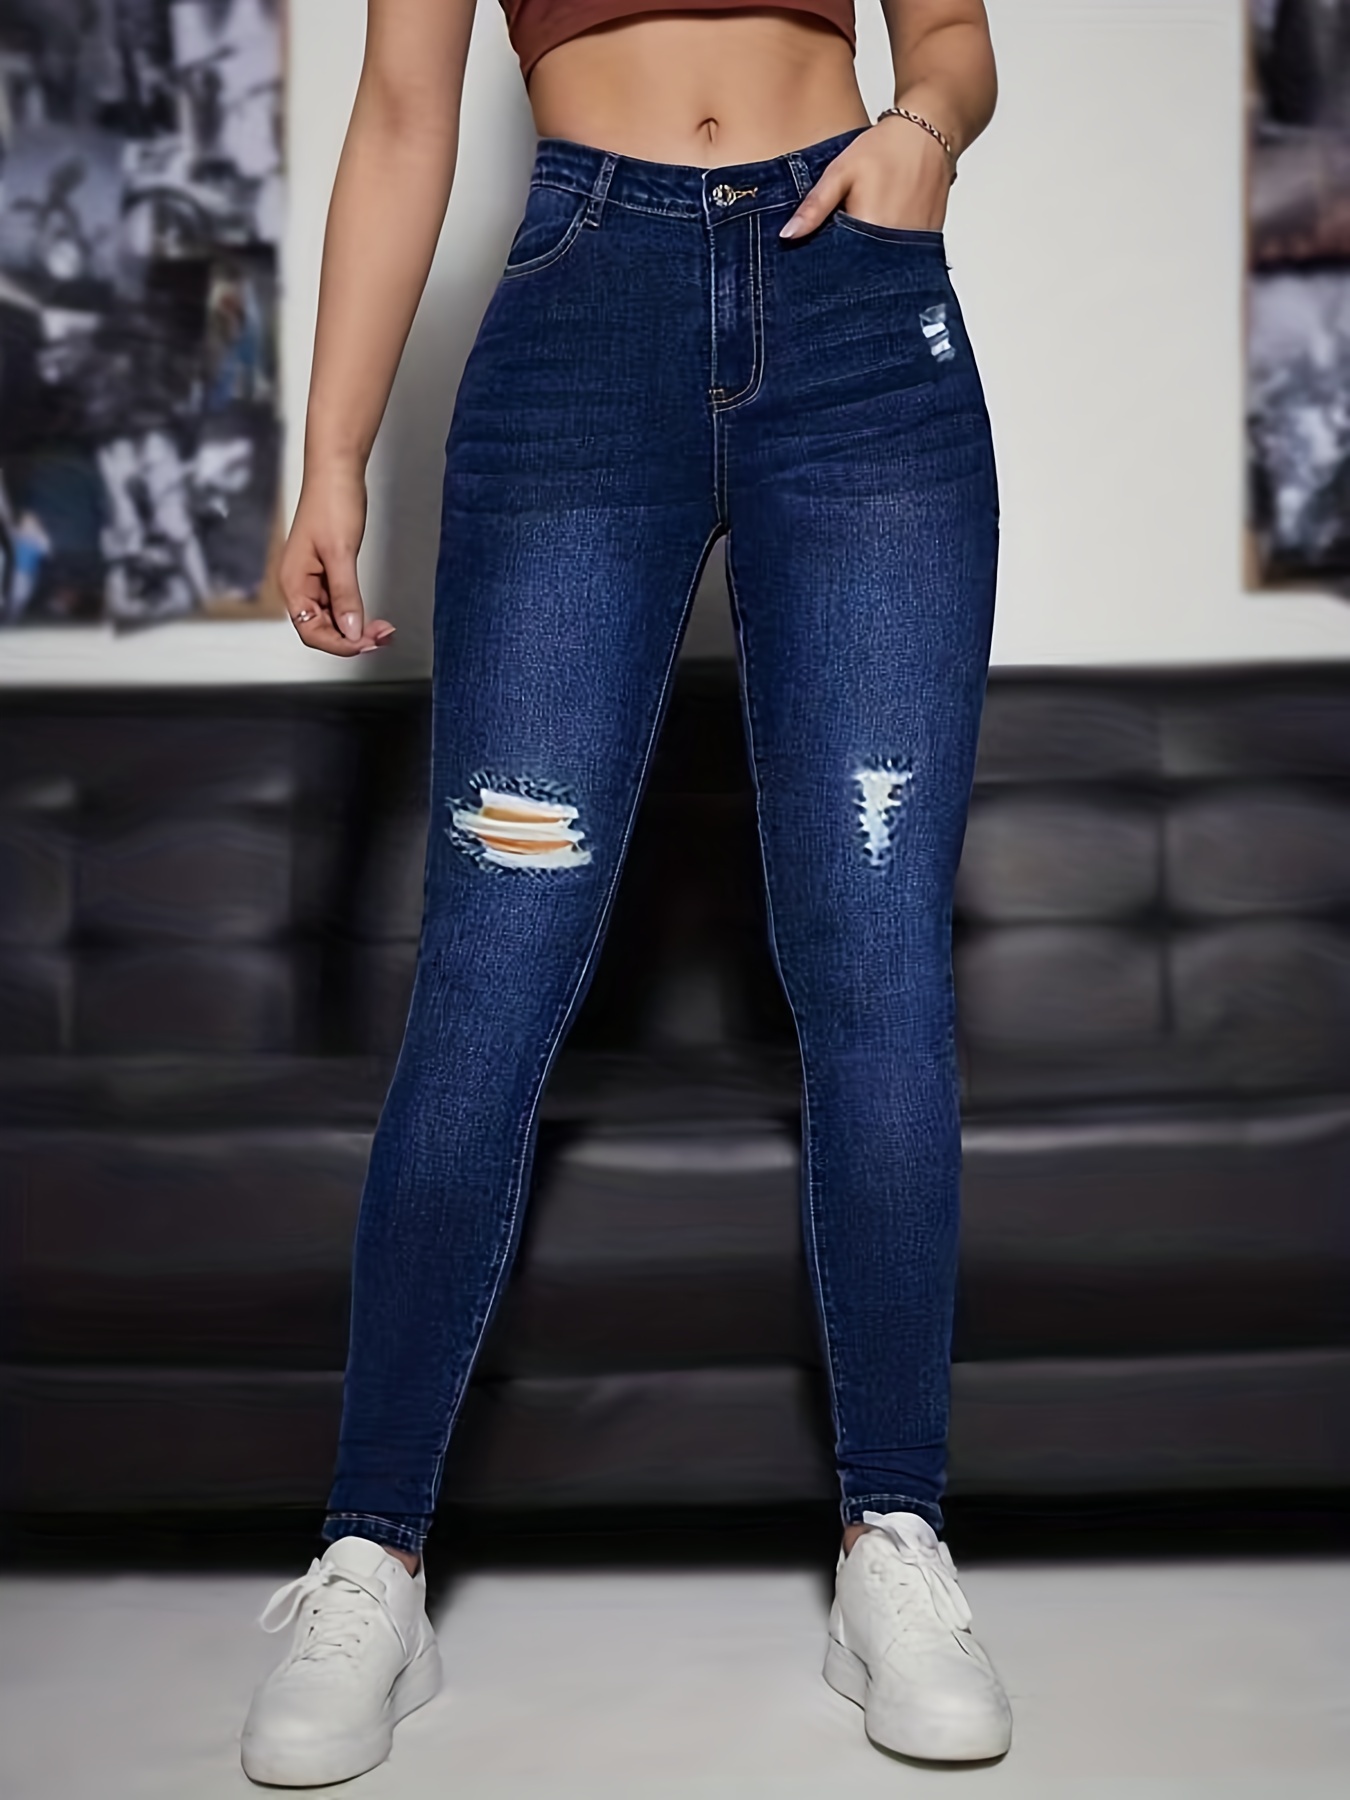 High * Water Ripple Embossed Cropped Skinny Jeans, High Waist Distressed  Tight Stretchy Denim Pants, Women's Denim Jeans & Clothing